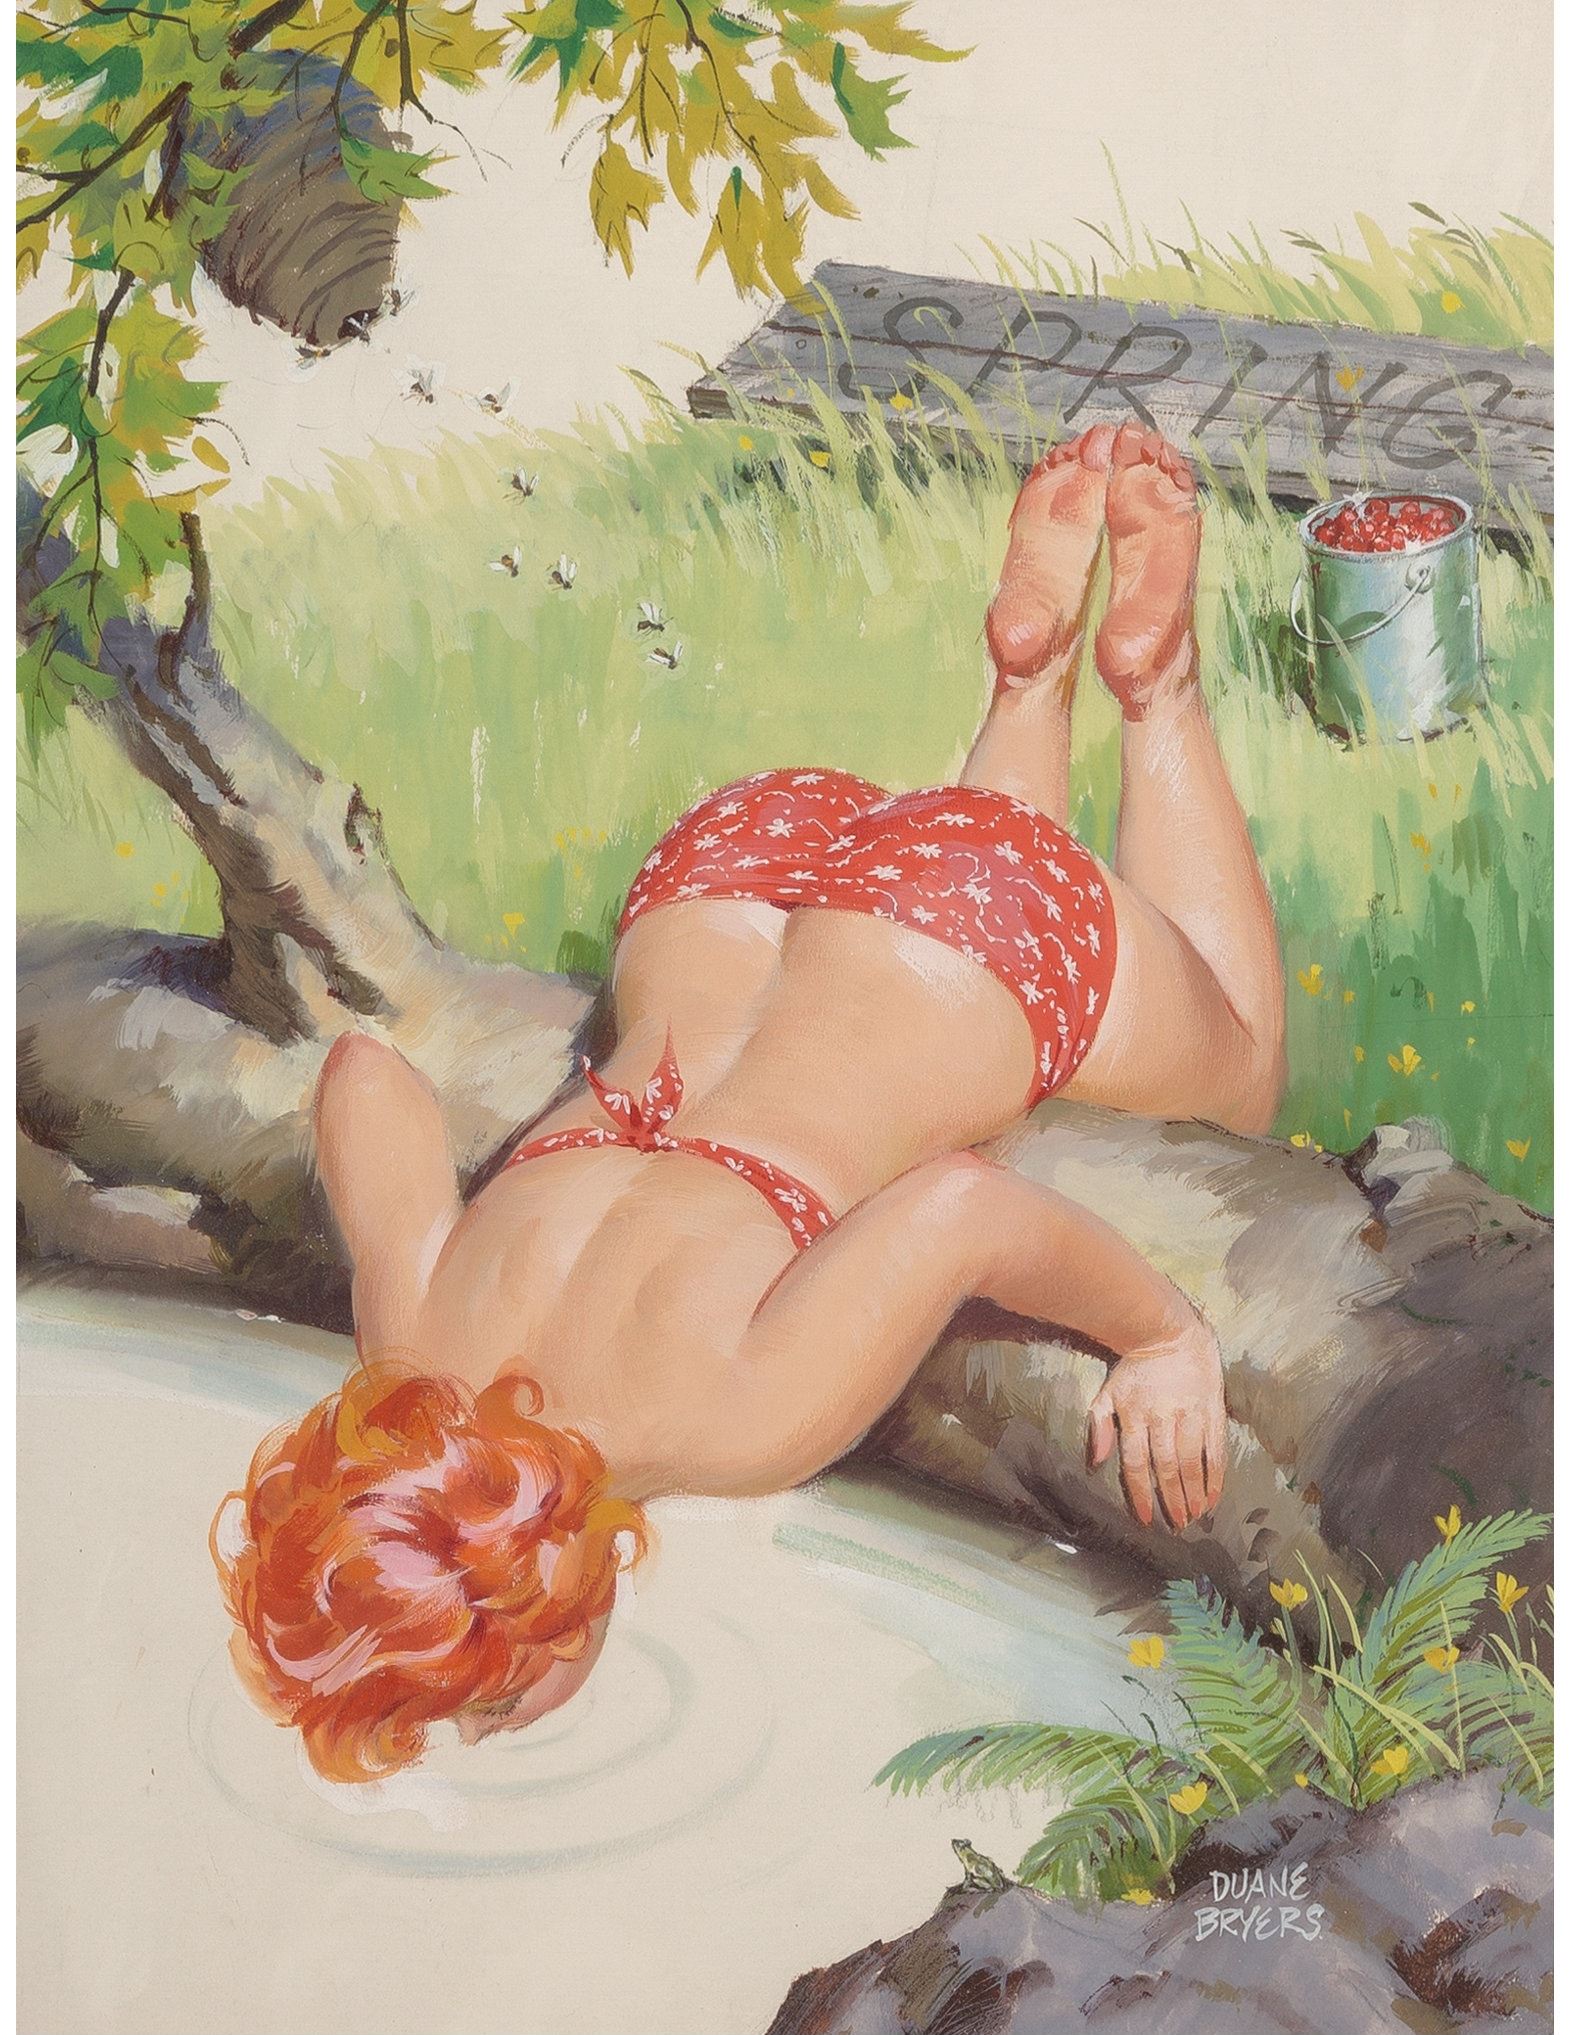 Hilda Drinking from the Spring, Brown & Bigelow calendar illustration by Duane Bryers